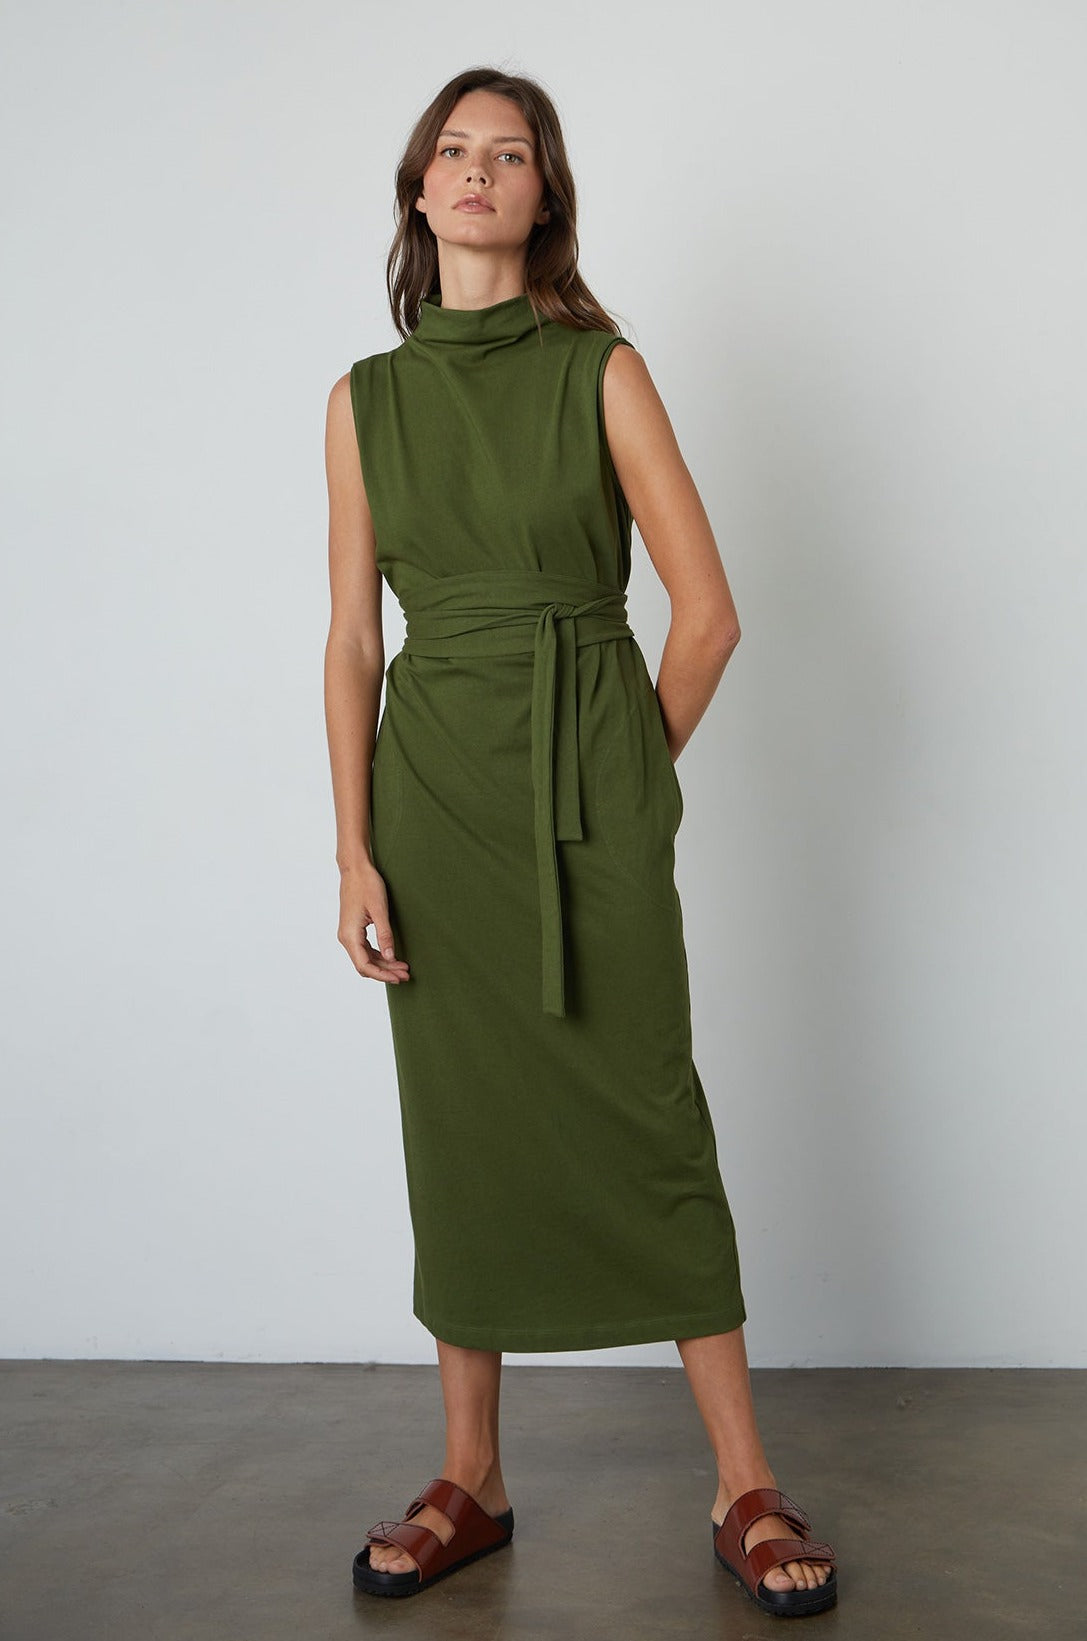 Hydie Mock Neck Dress Structured Cotton in Evergreen with belt front view 2-24994482487489